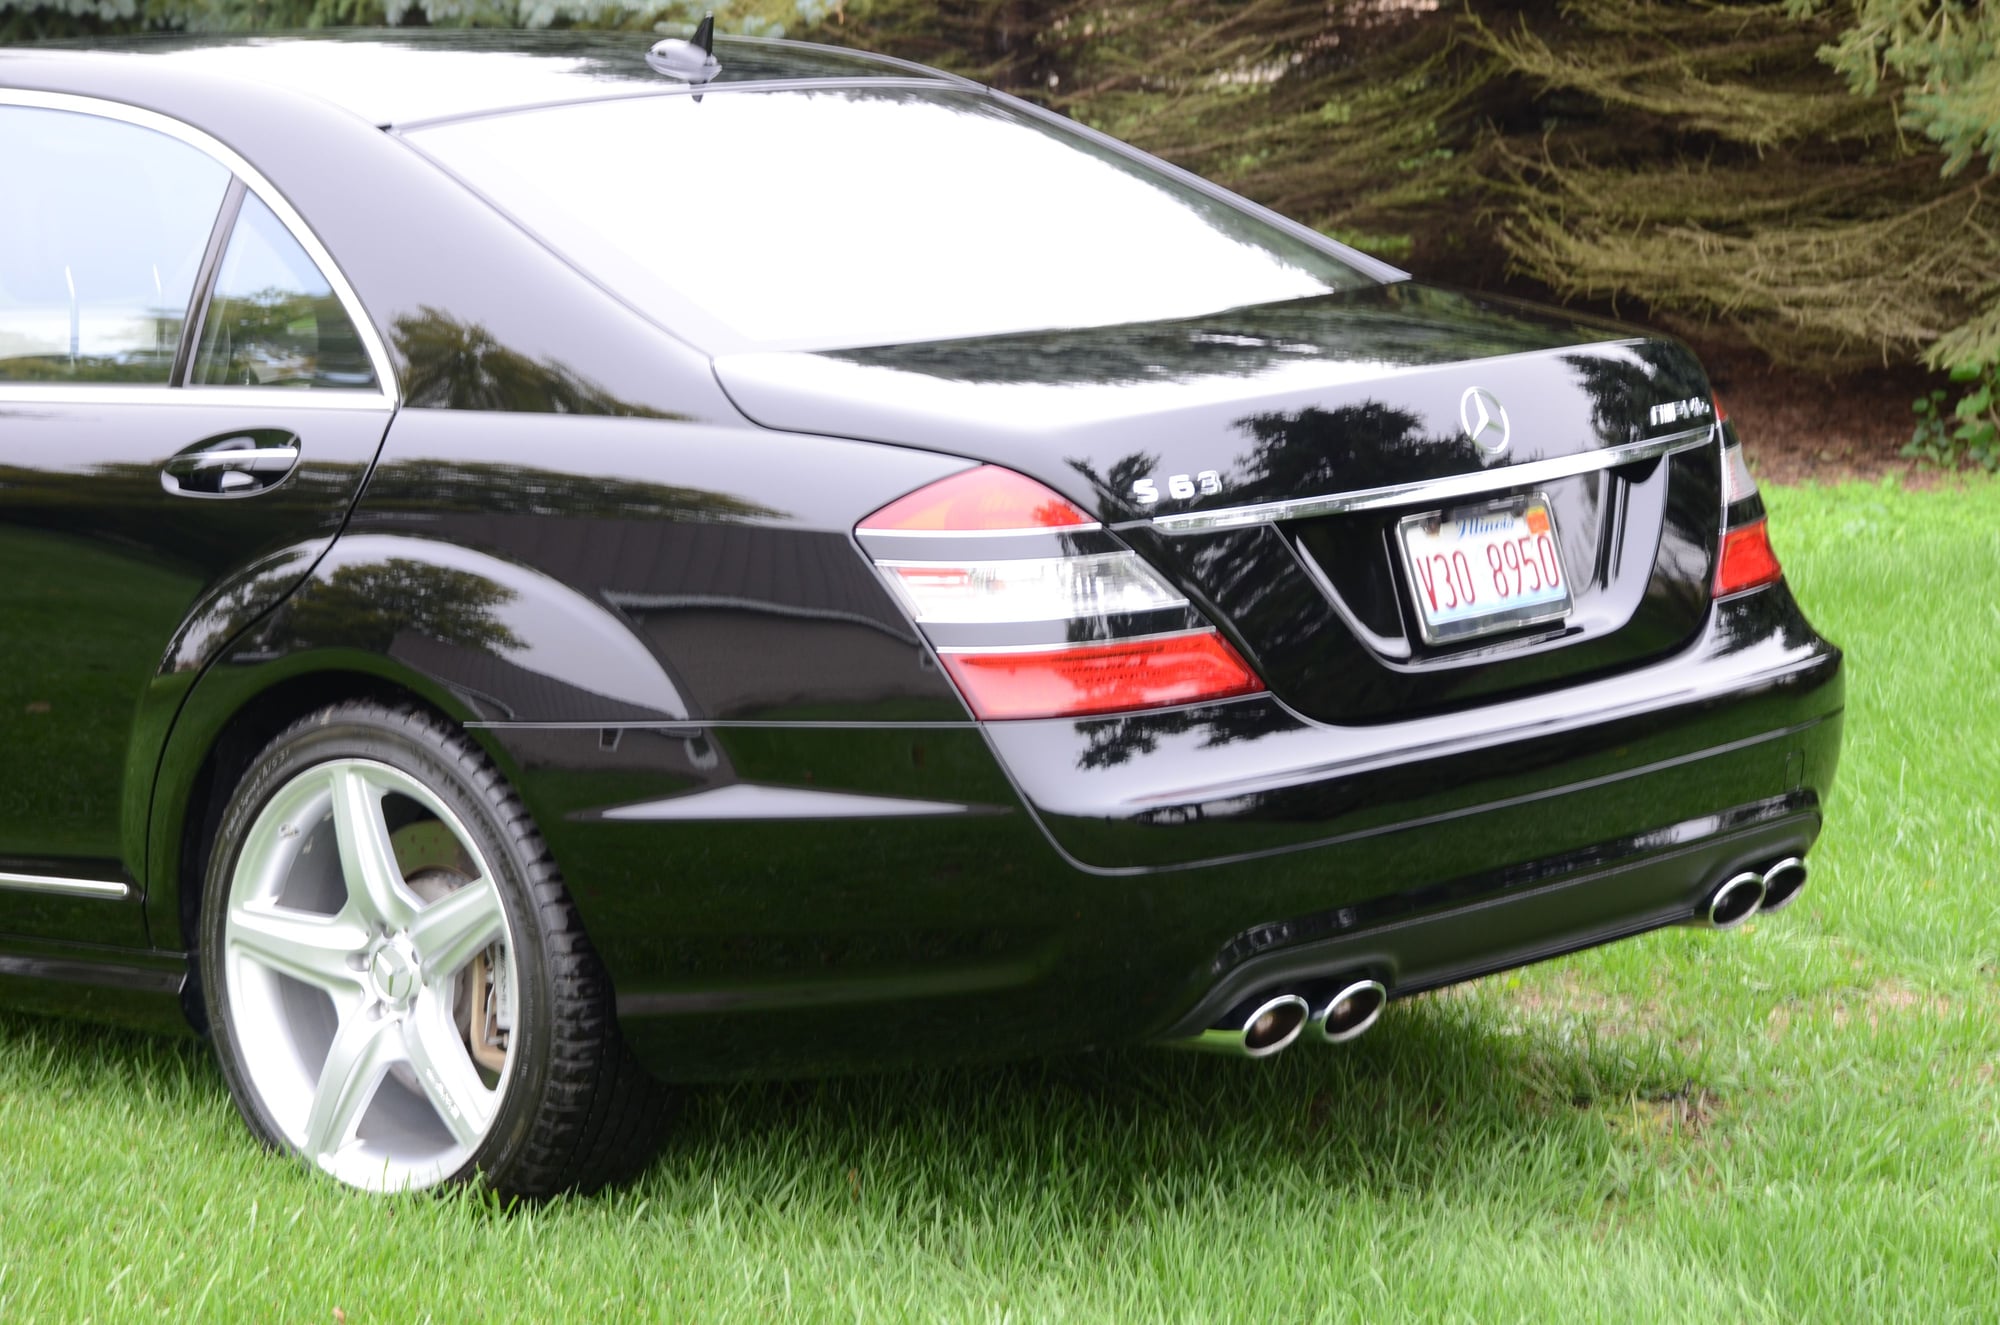 2008 Mercedes-Benz S63 AMG - 2008 Mercedes S63 2nd- Owner W221 All OEM Original - Used - VIN WDDNG77X48A154350 - 8 cyl - 2WD - Automatic - Sedan - Black - Southwest Chicagoland, IL 60935, United States